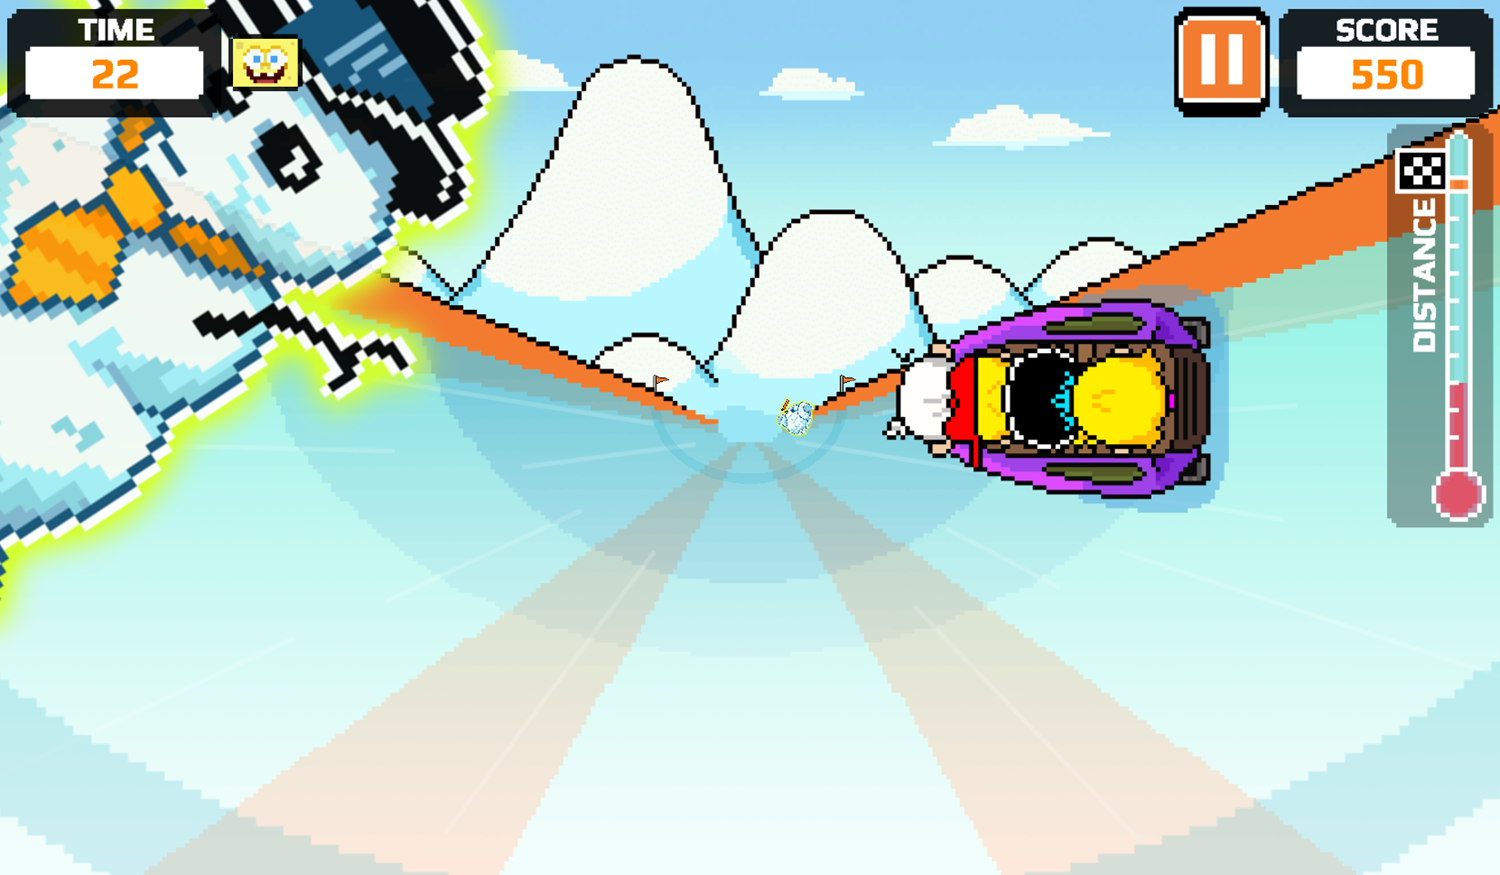 Nick Champions of the Chill 2 Game Loud Loud Loud Sled Gameplay Screenshot.